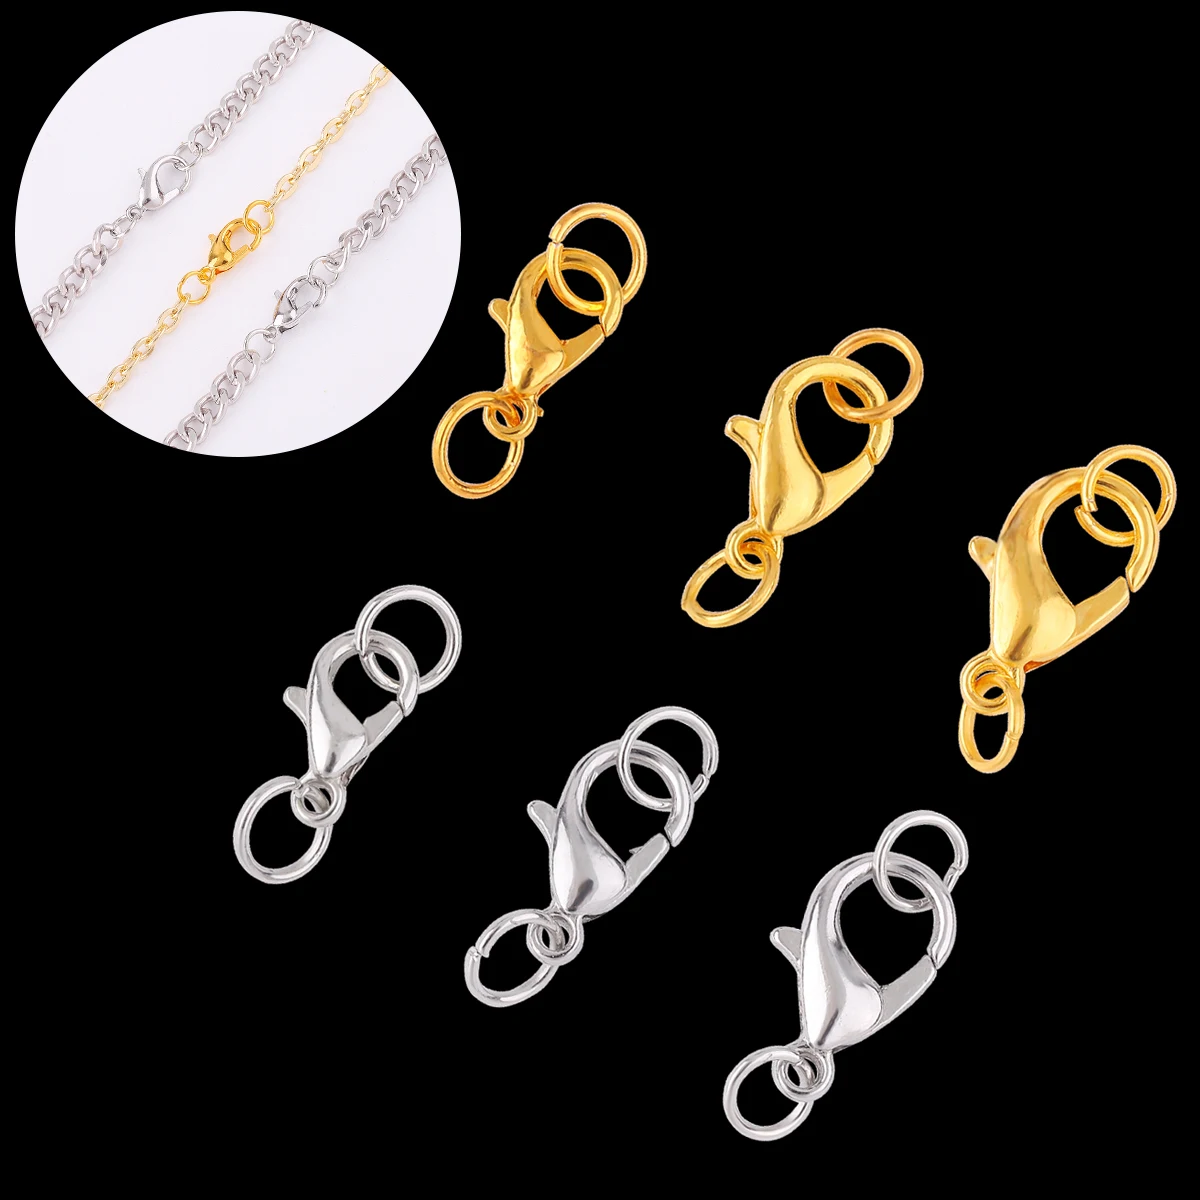 10-30Pcs Stainless Steel Gold Plated Lobster Clasp Claw Clasps For Bracelet  Necklace Chain Diy Jewelry Making Findings Supplies - AliExpress